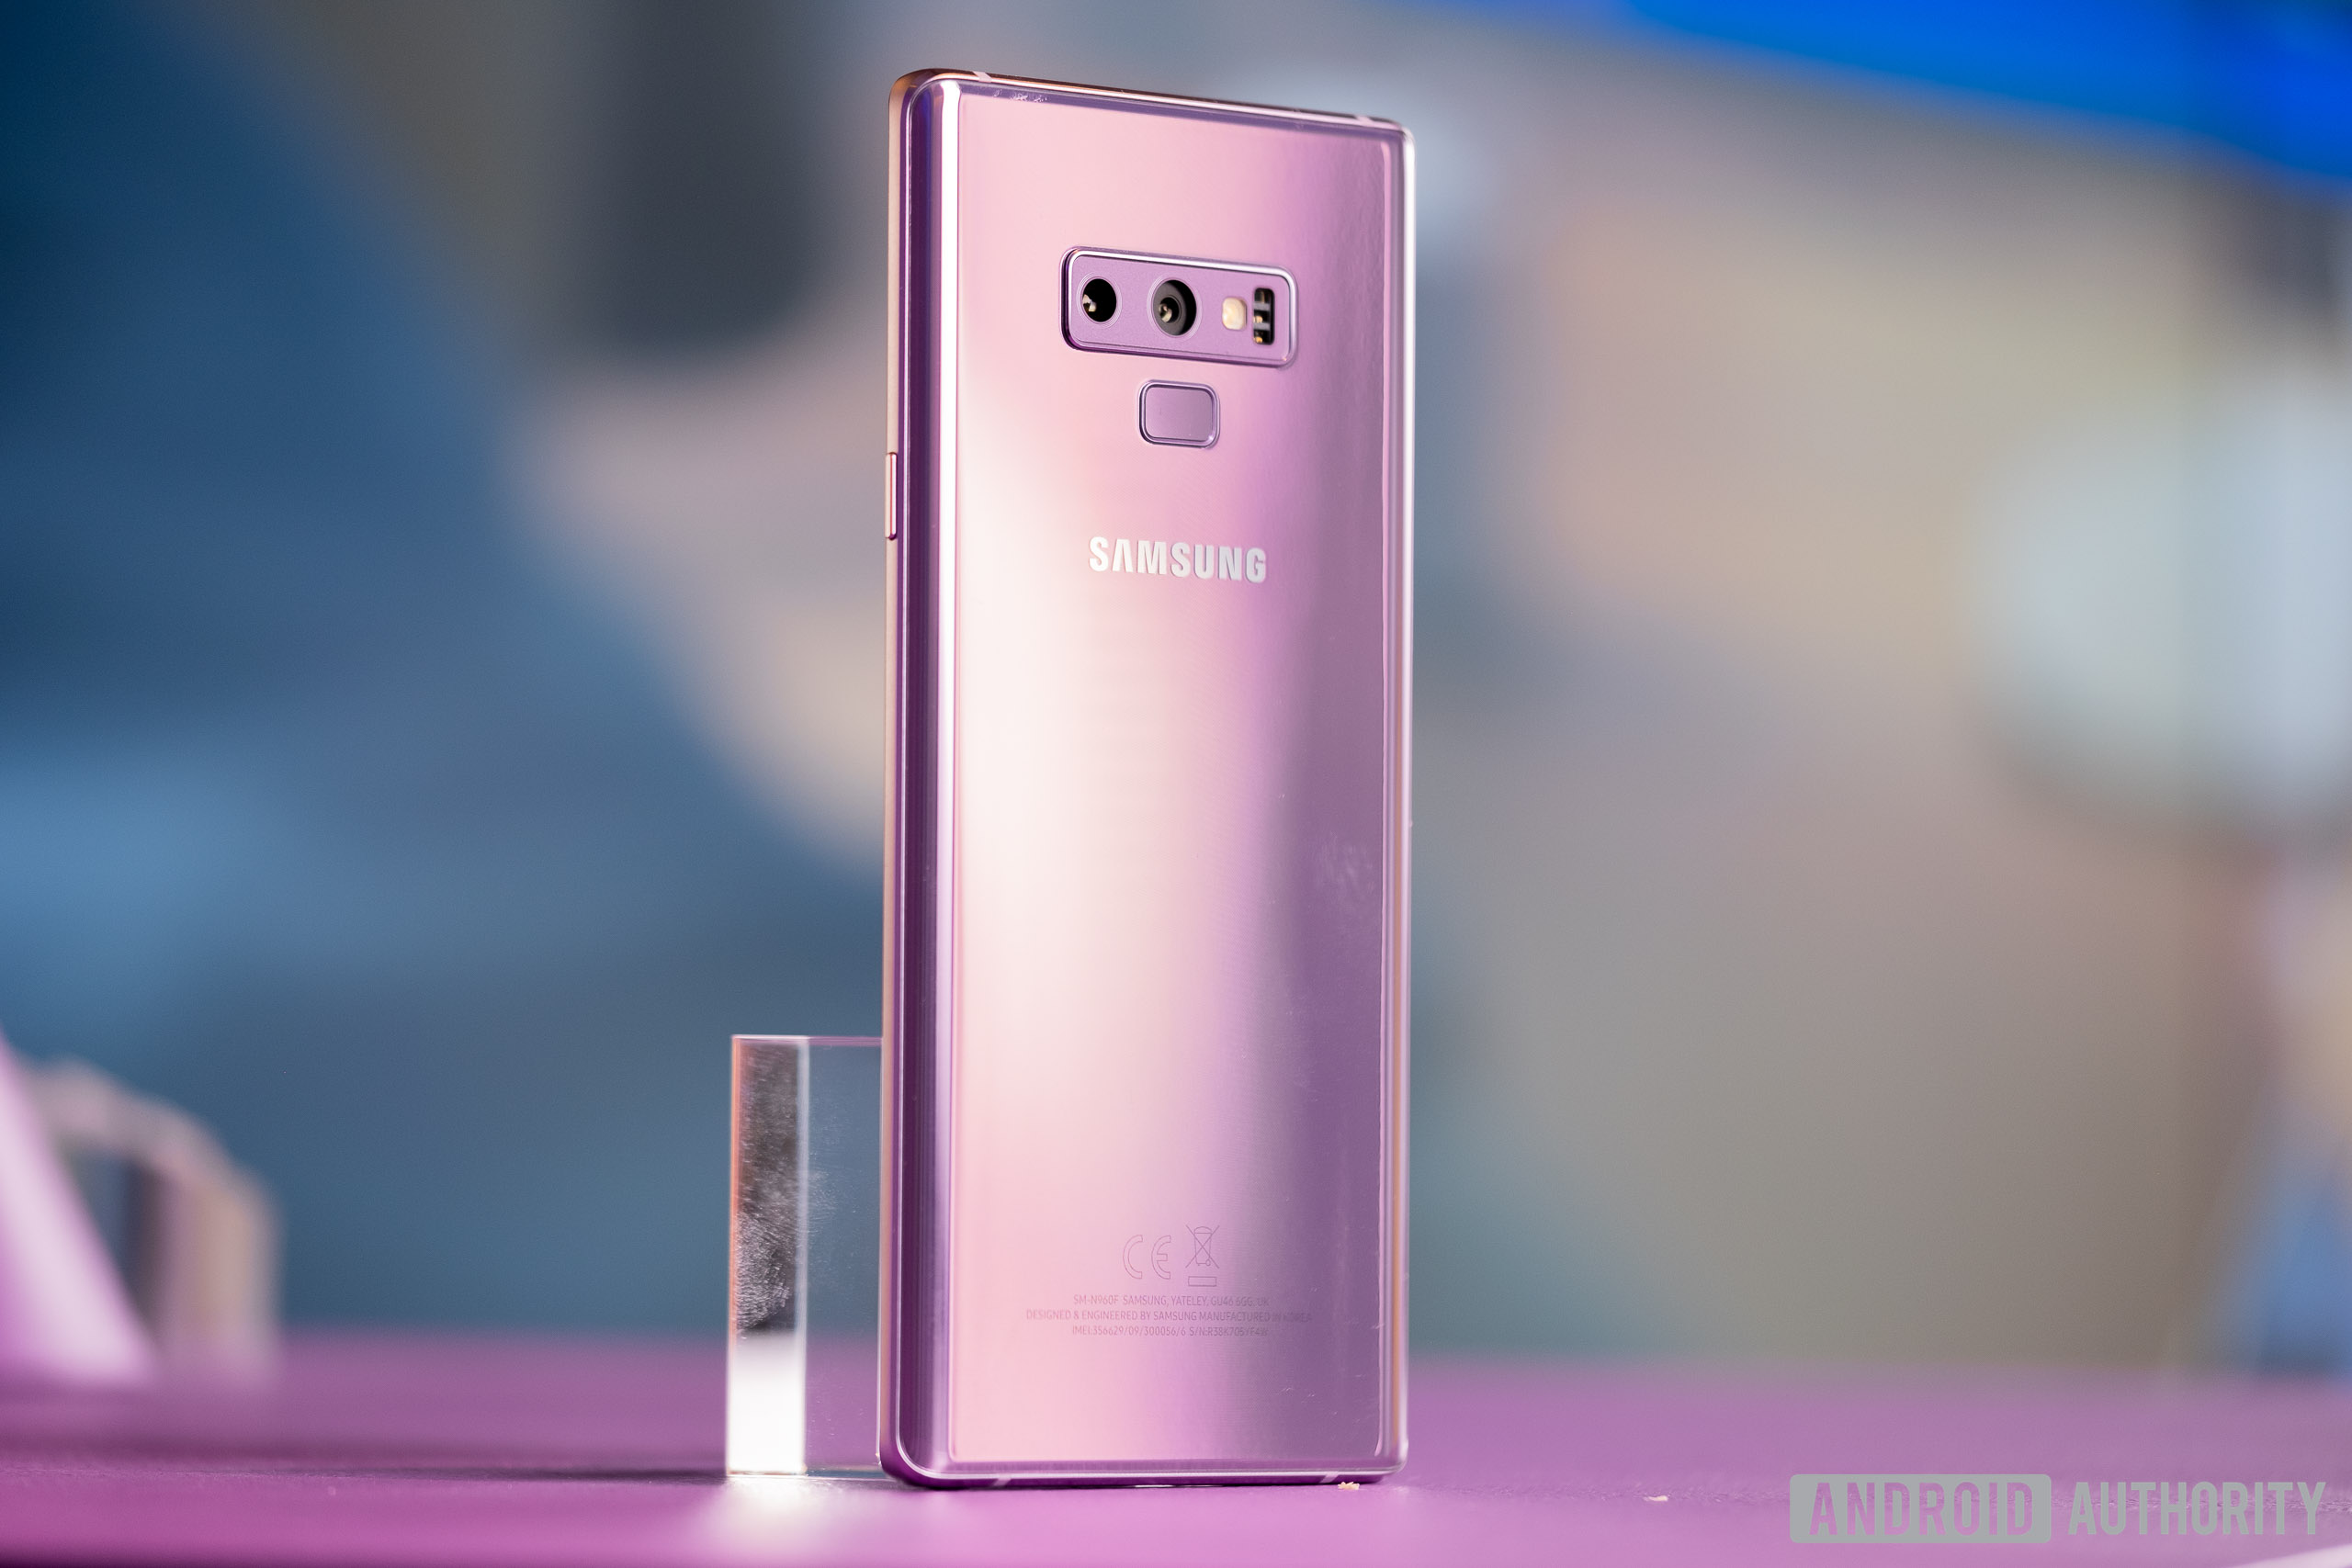 The Samsung Galaxy Note 9.